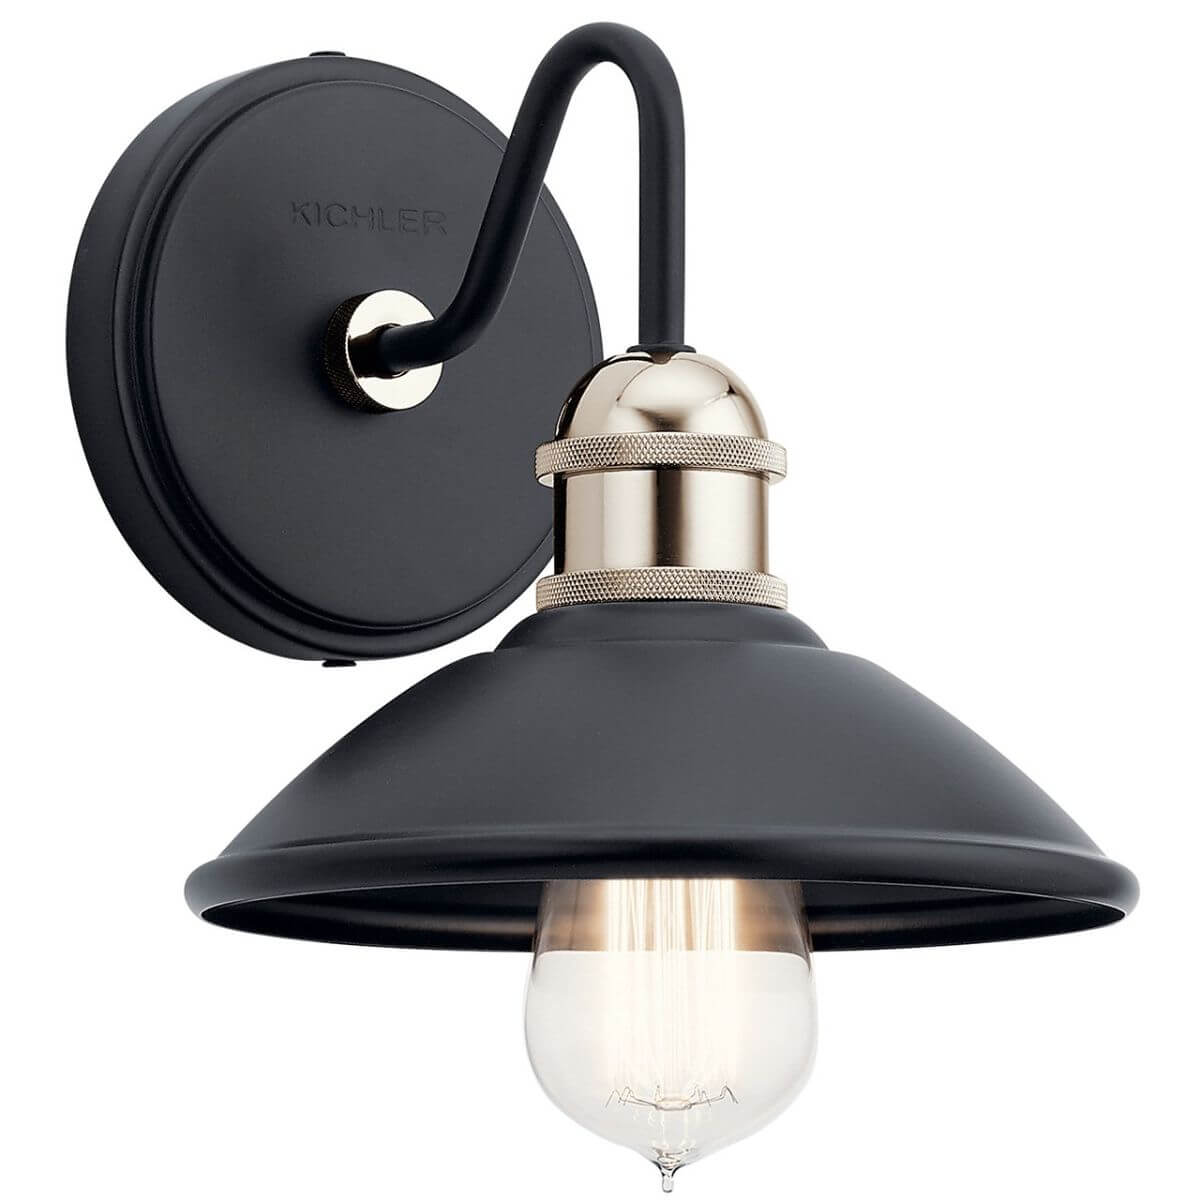 1 Light 7 inch Tall Wall Sconce in Black - 239767